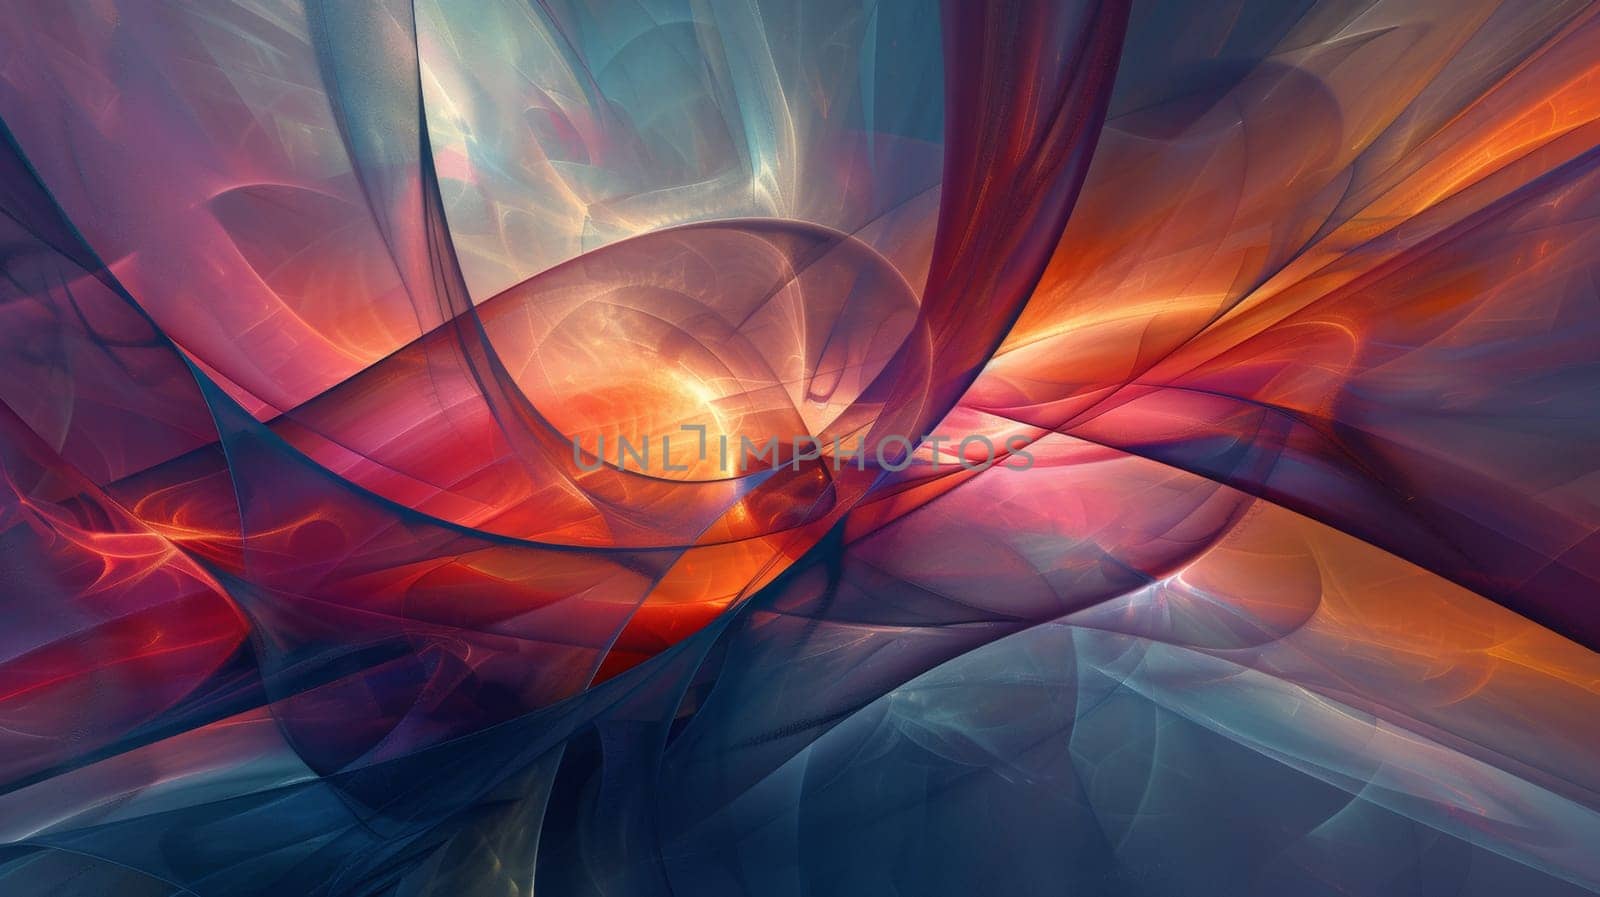 A digital painting of a swirling design with bright colors